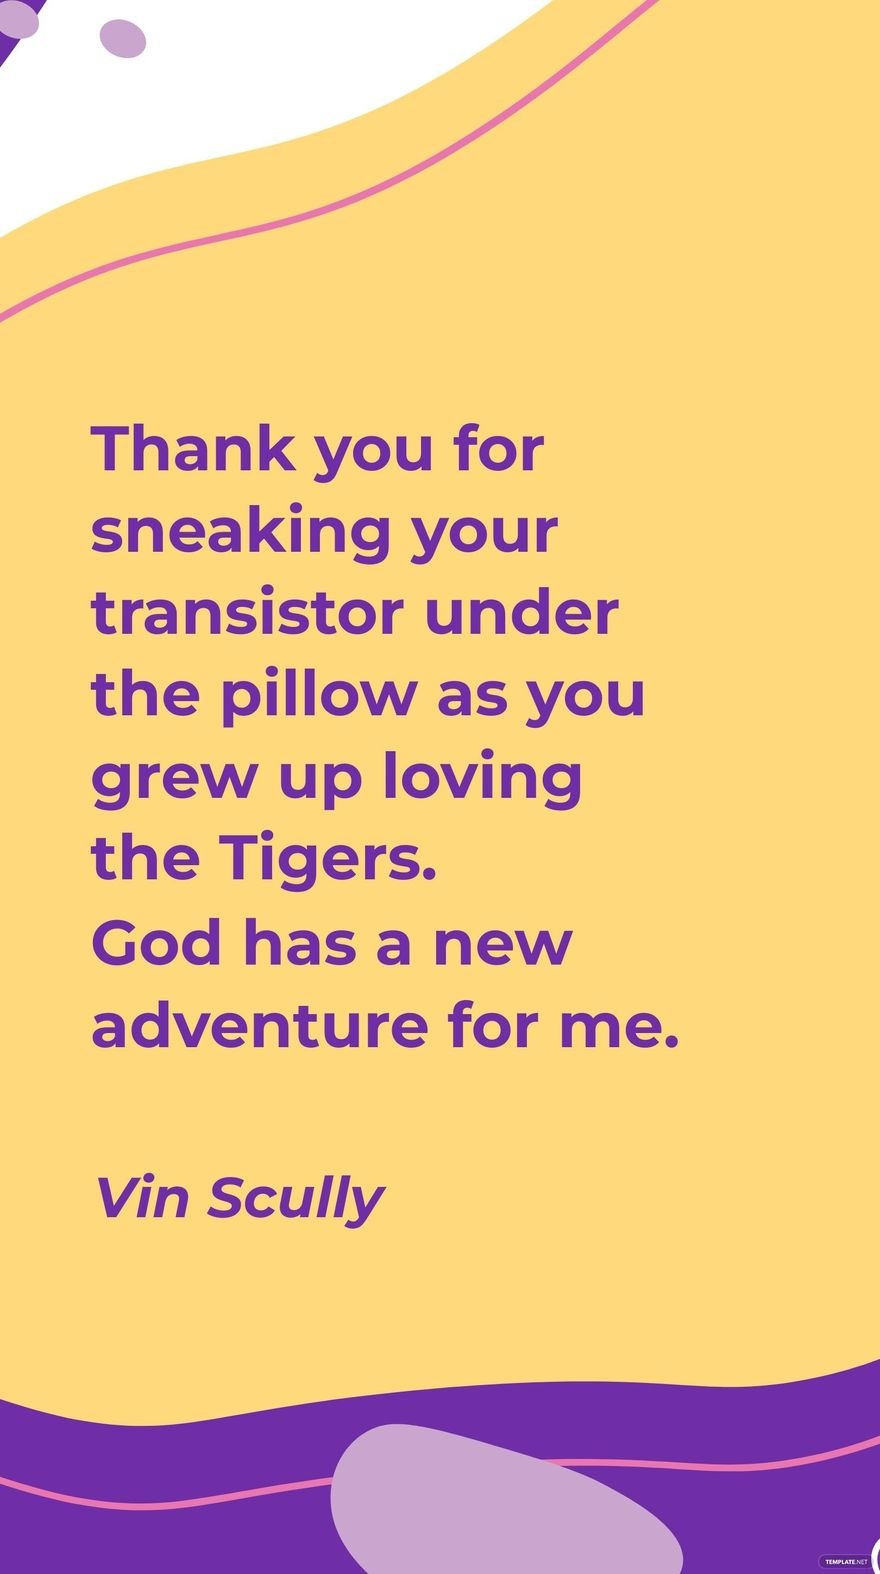 Vin Scully - Thank you for sneaking your transistor under the pillow as you grew up loving the Tigers. God has a new adventure for me. in JPG